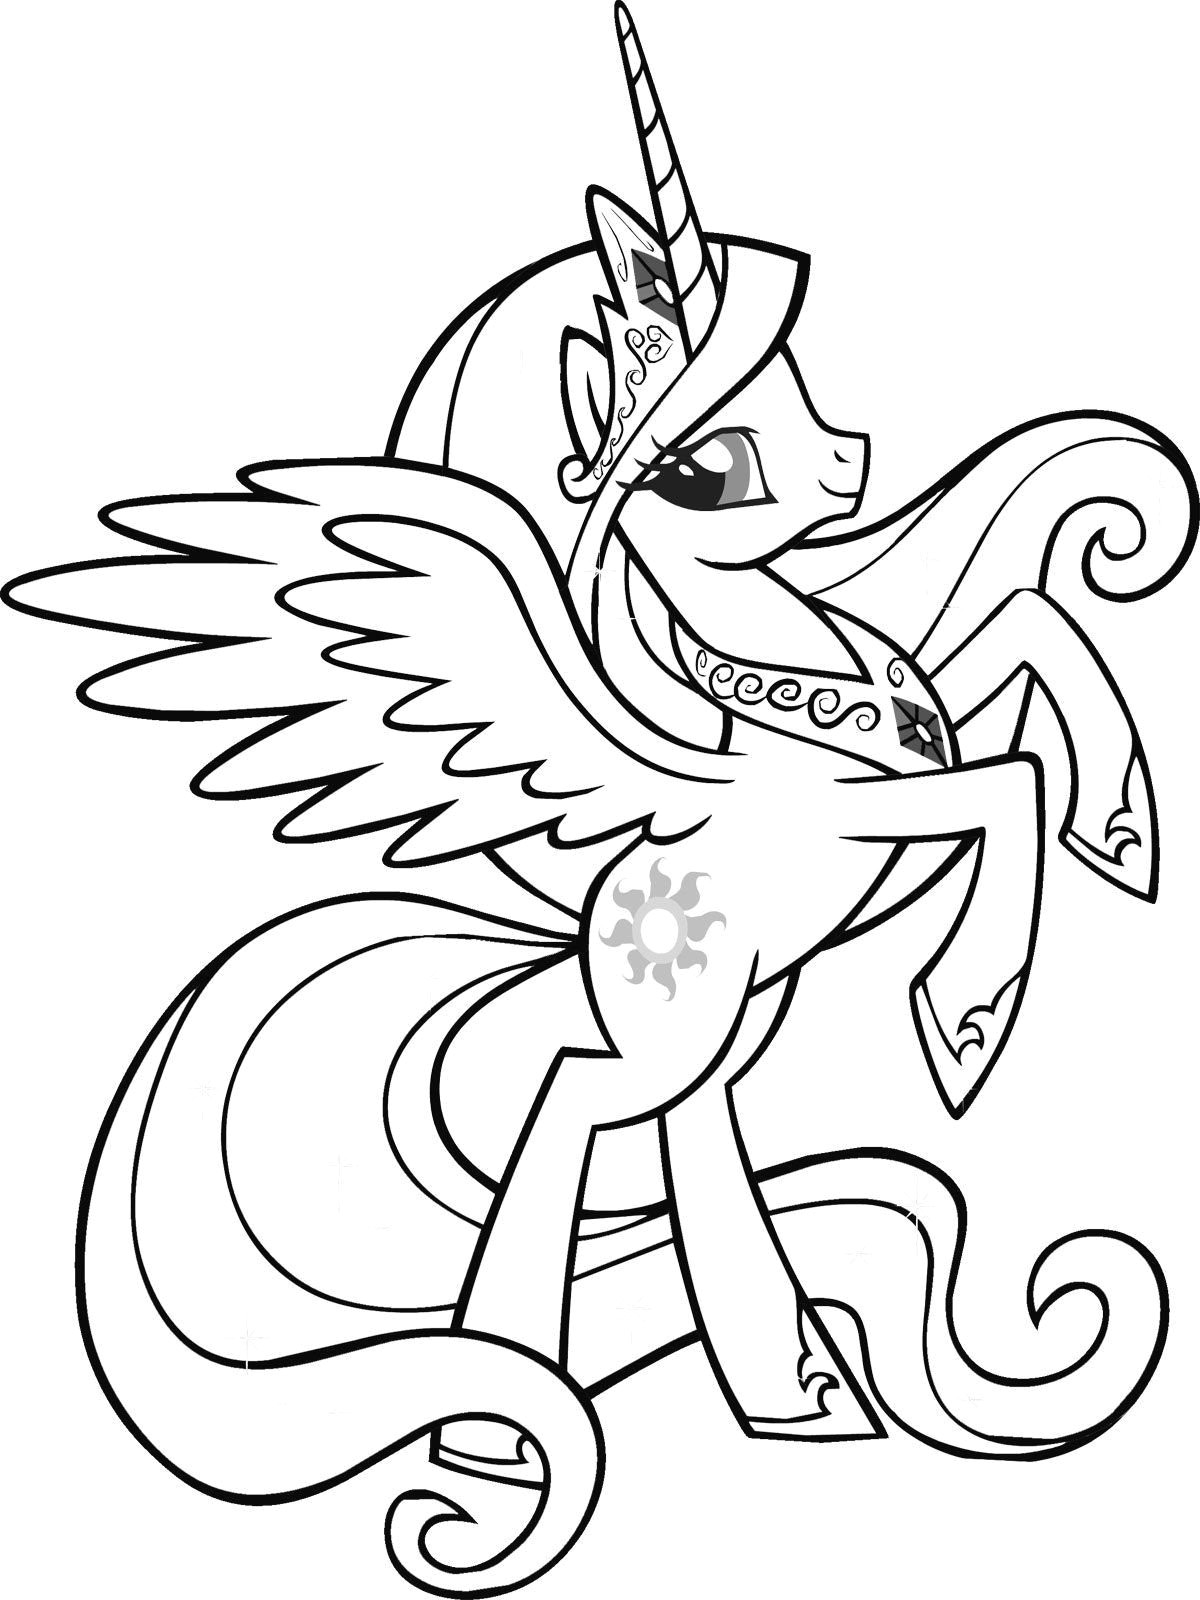 princess luna my little pony coloring page luxury my little pony coloring pages princess luna lovely pin od of princess luna my little pony coloring page jpg